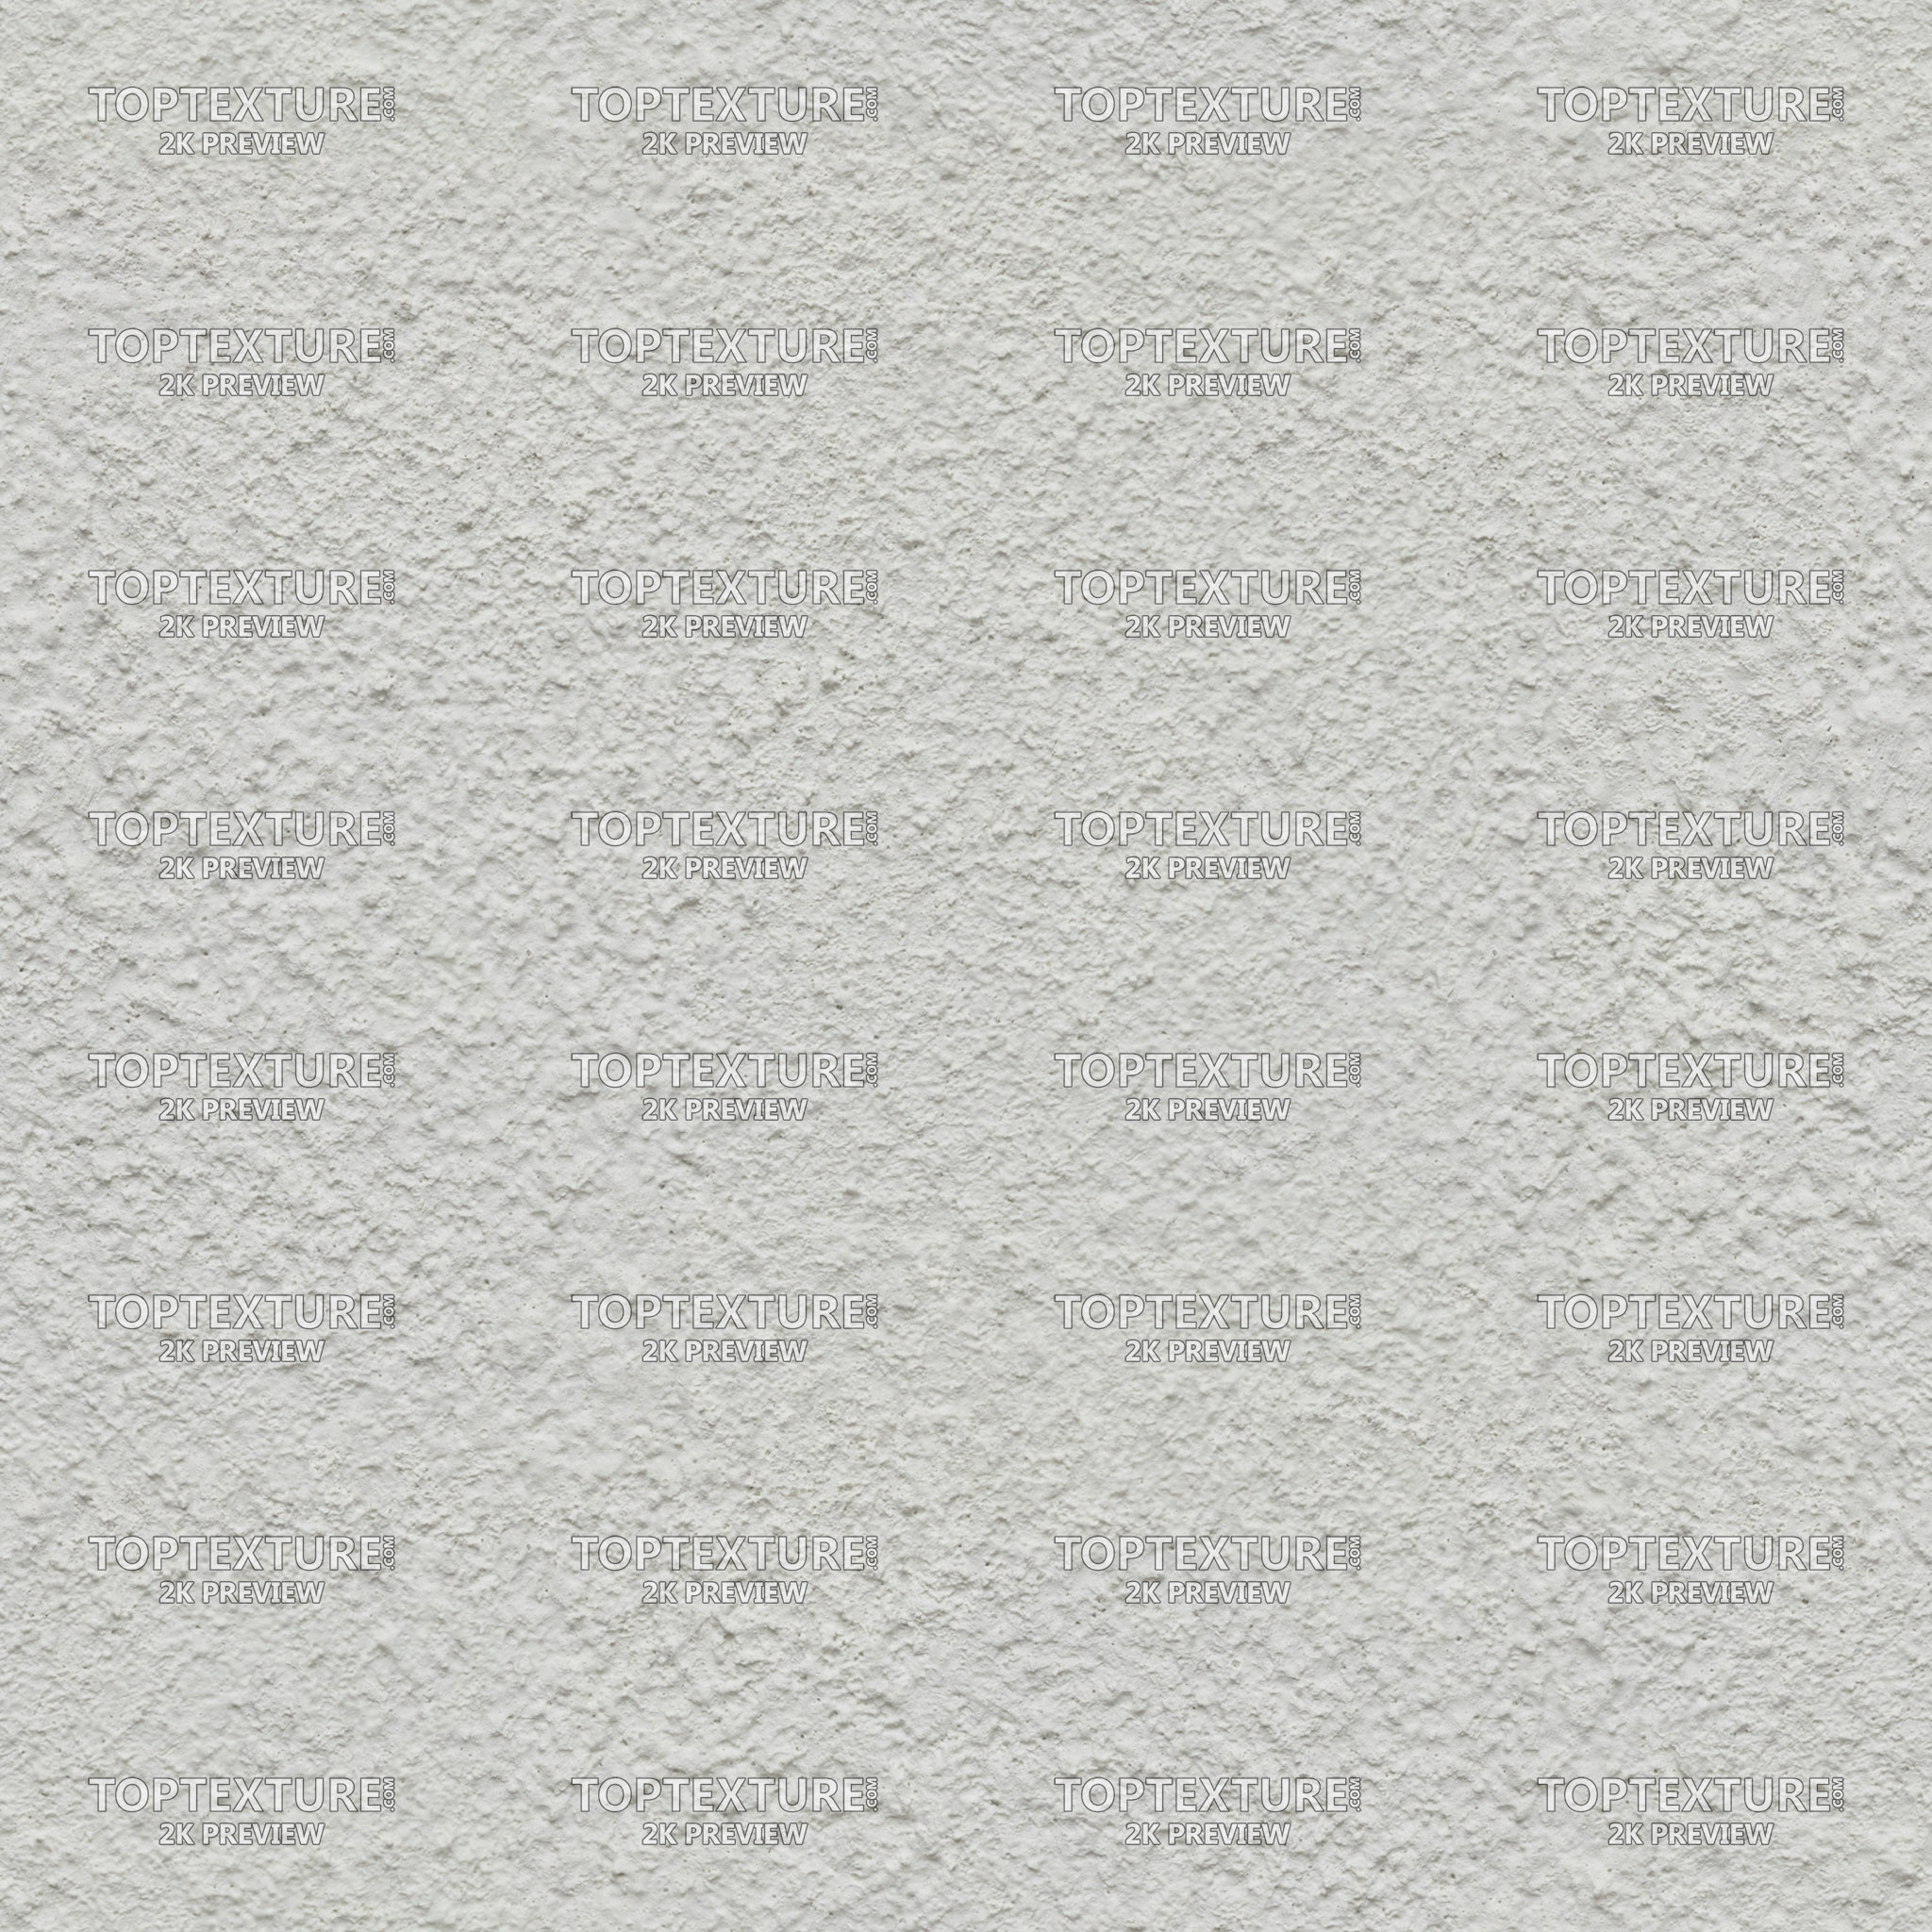 Rough White Plaster Wall - 2K preview